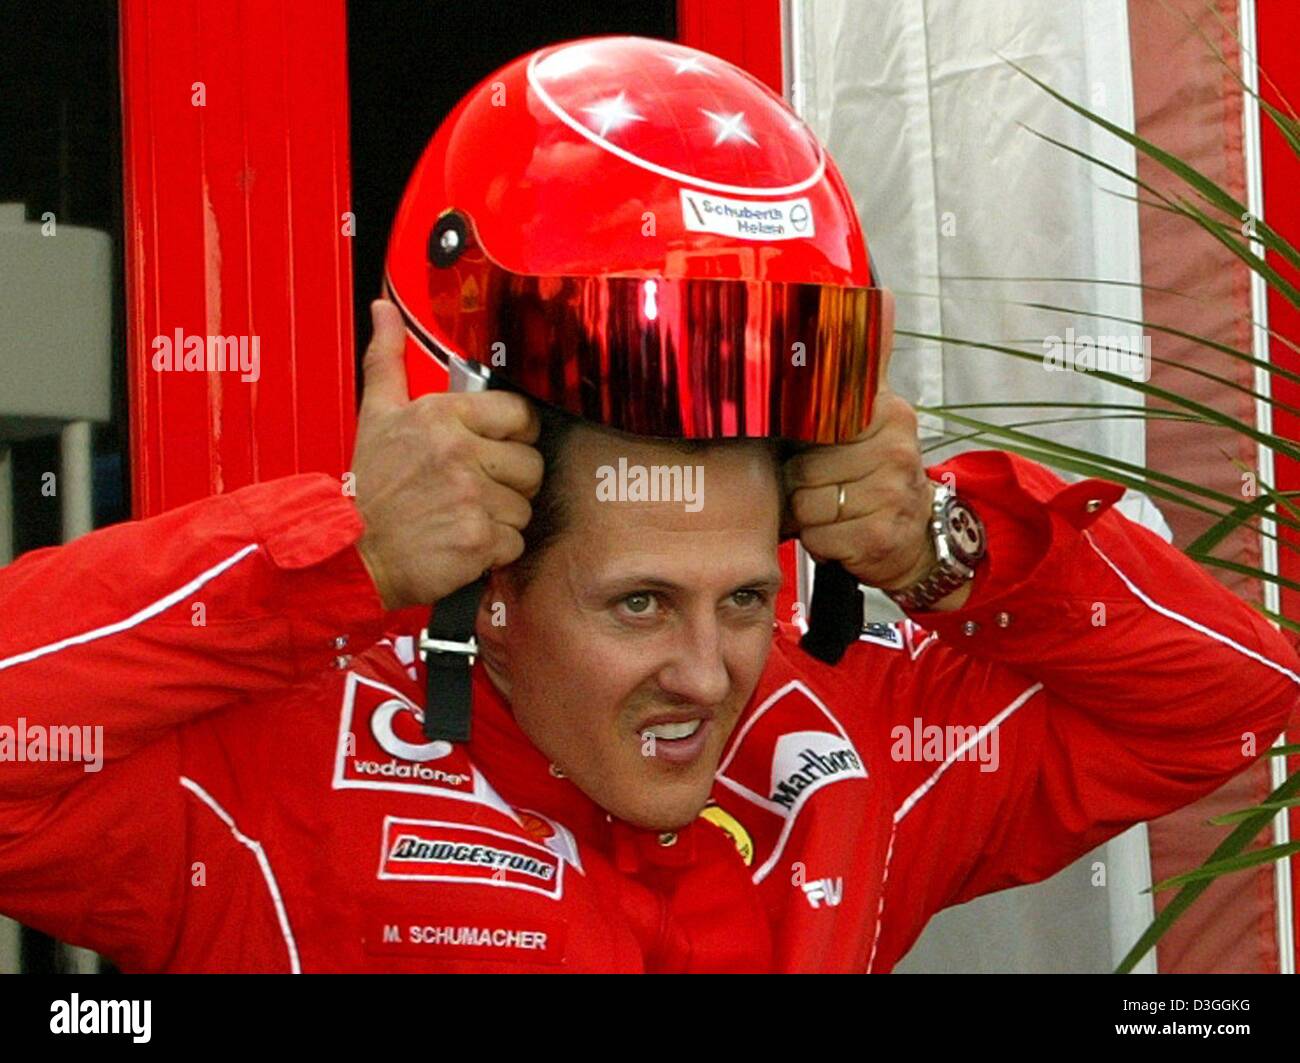 dpa) - German formula one pilot Michael Schumacher of Ferrari puts on a  helmet for a ride on his motor scooter on the formula one racing track in  Spa-Francorchamps, Belgium, Thursday evening,